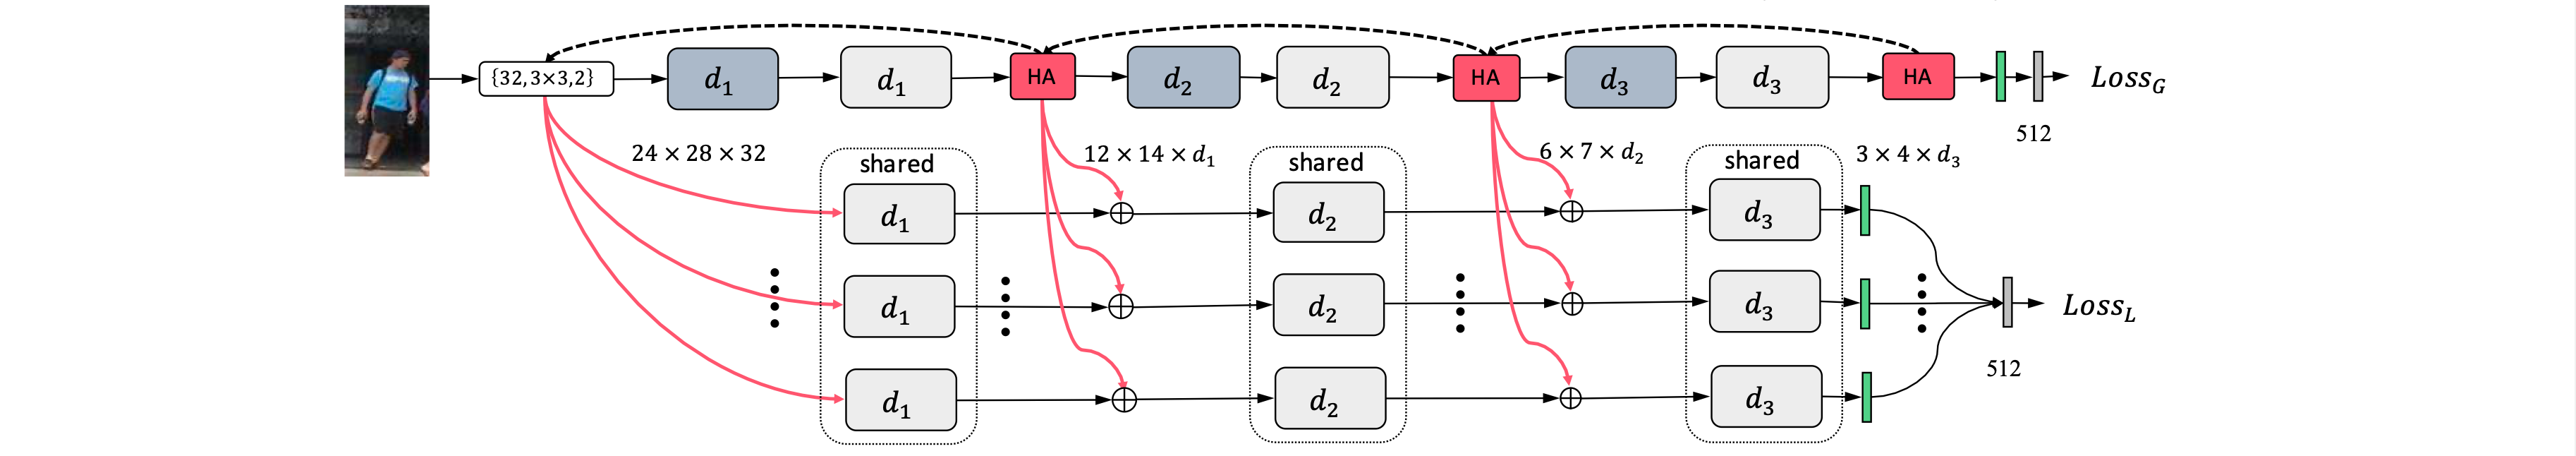 Transferable Joint Attribute-Identity Deep Learning for Unsupervised Person Re-Identification